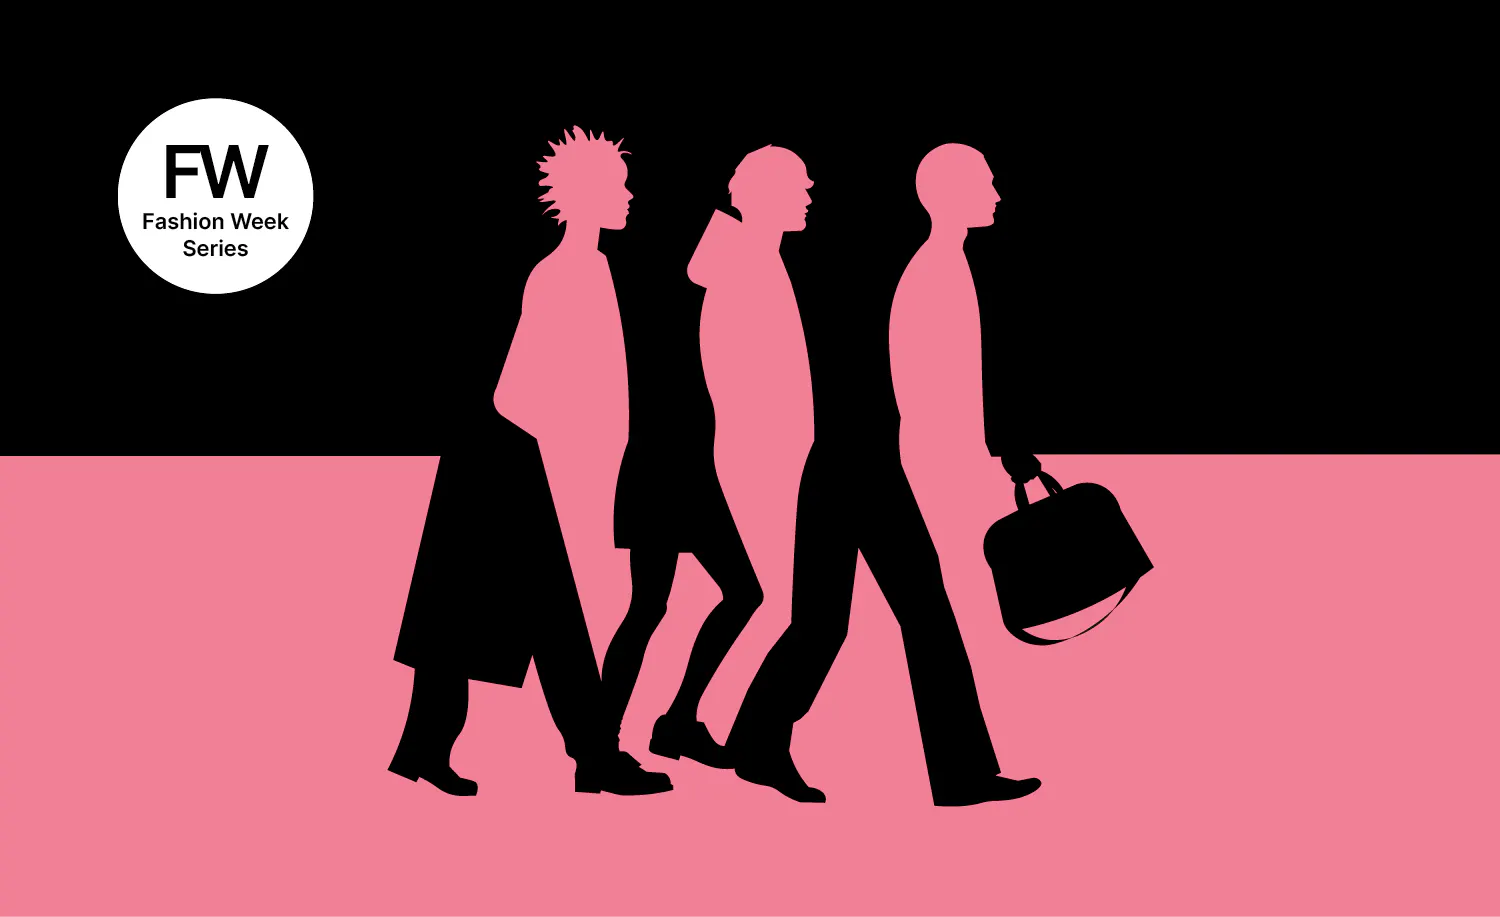 a poster with silhouettes of people walking with luggage.